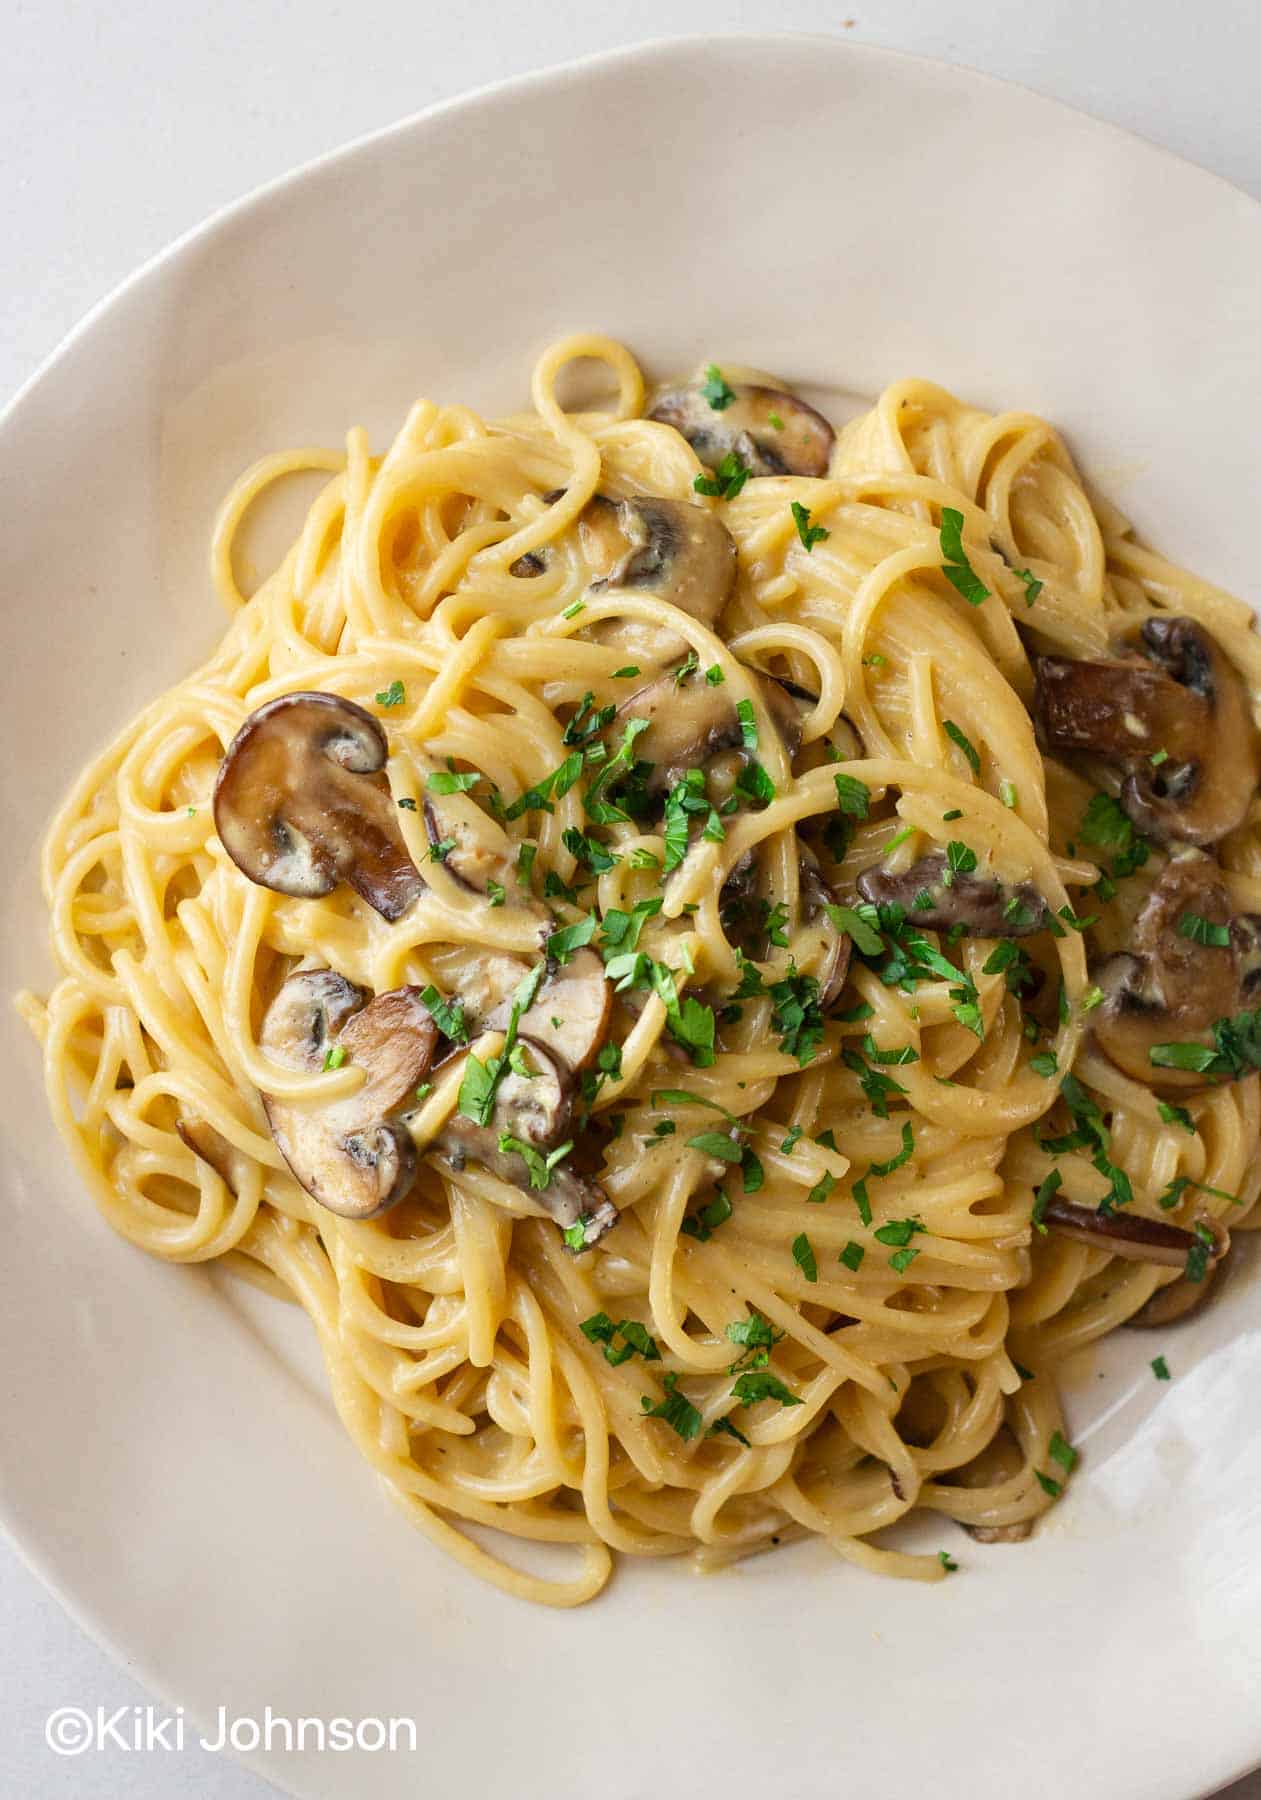 a plate with mushroom pasta carbonara sprinkled with parsley 